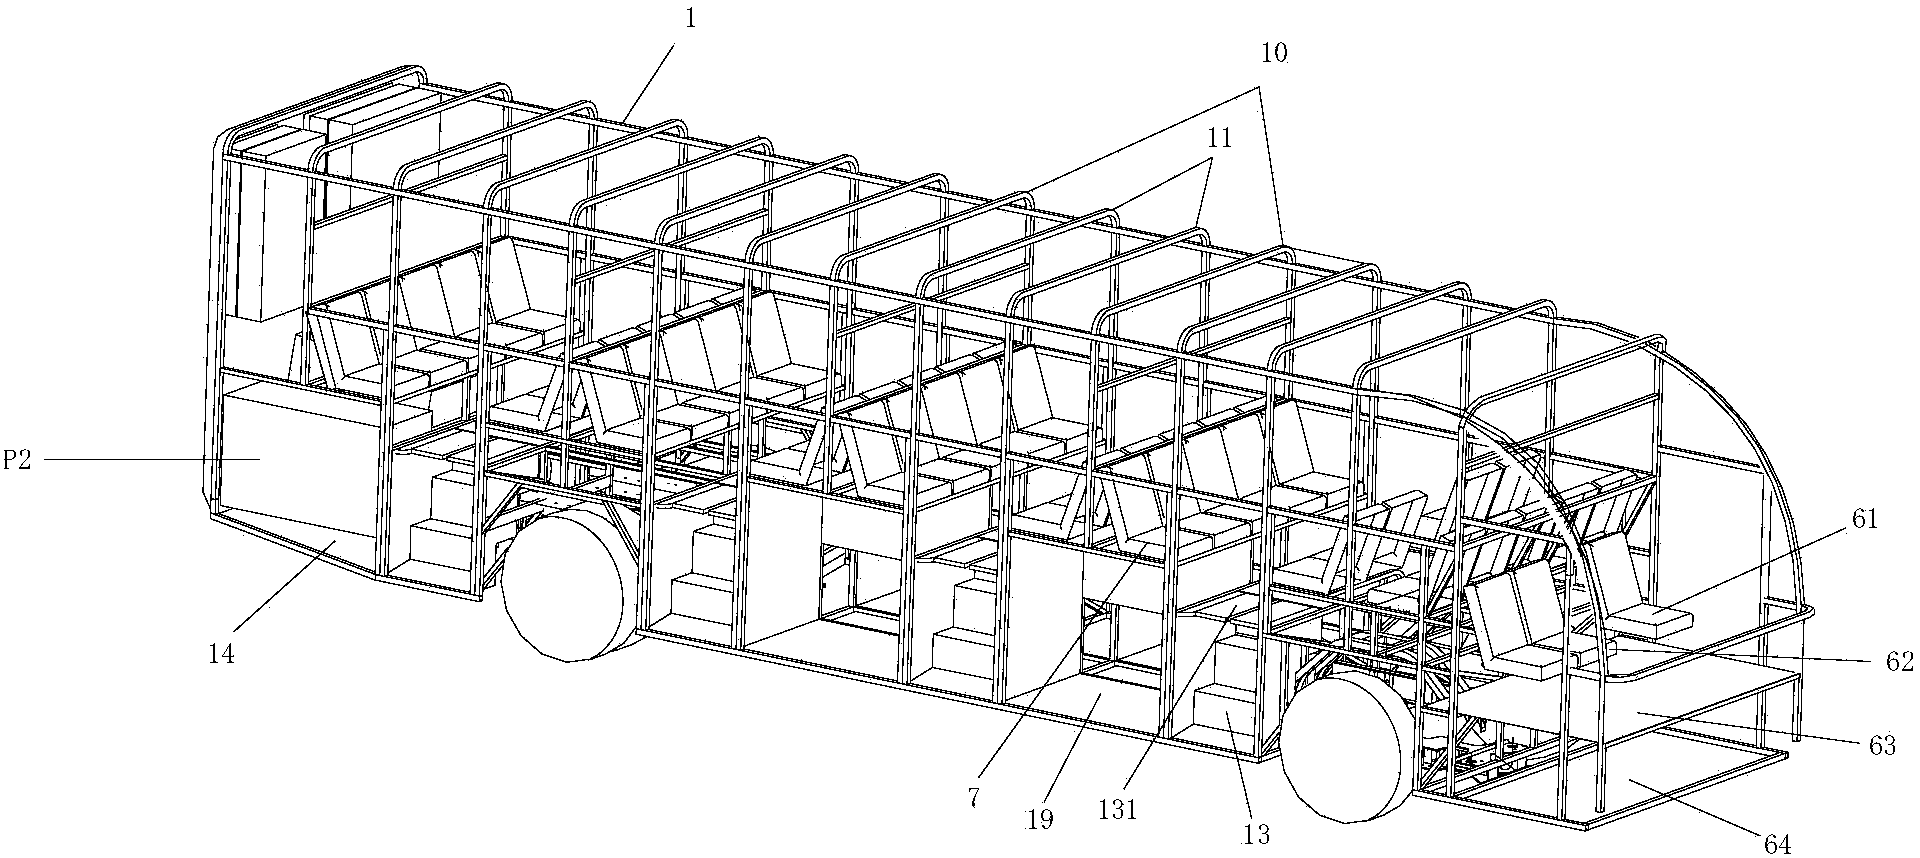 Body structure of full-bearing coach